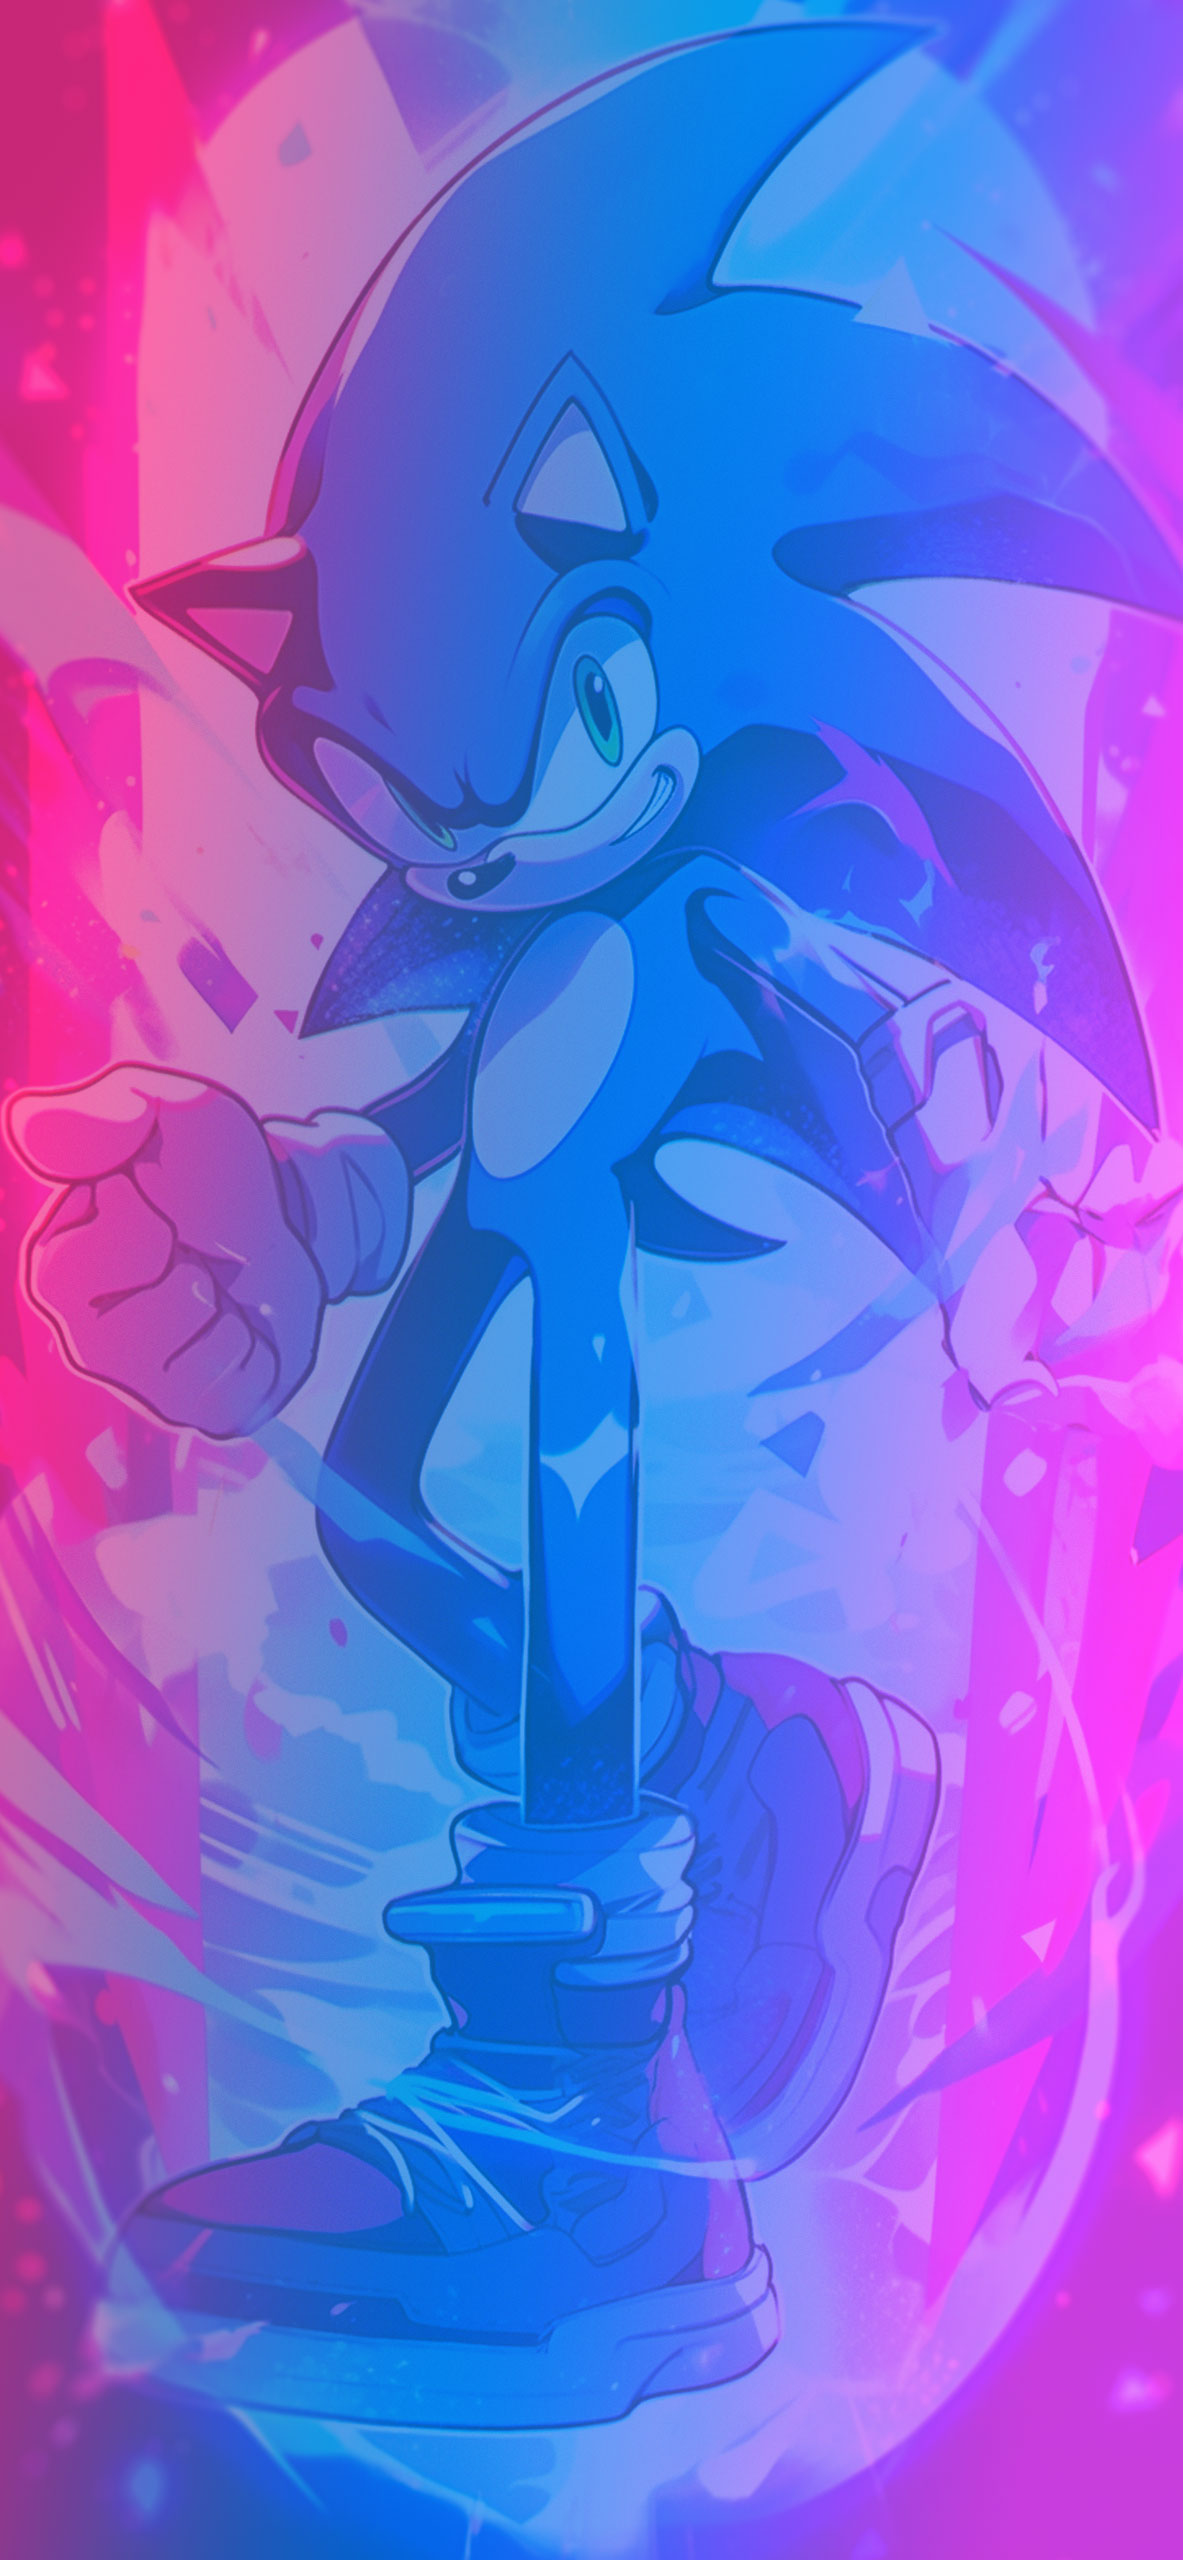 Download exclusive 'Sonic Colours' wallpaper